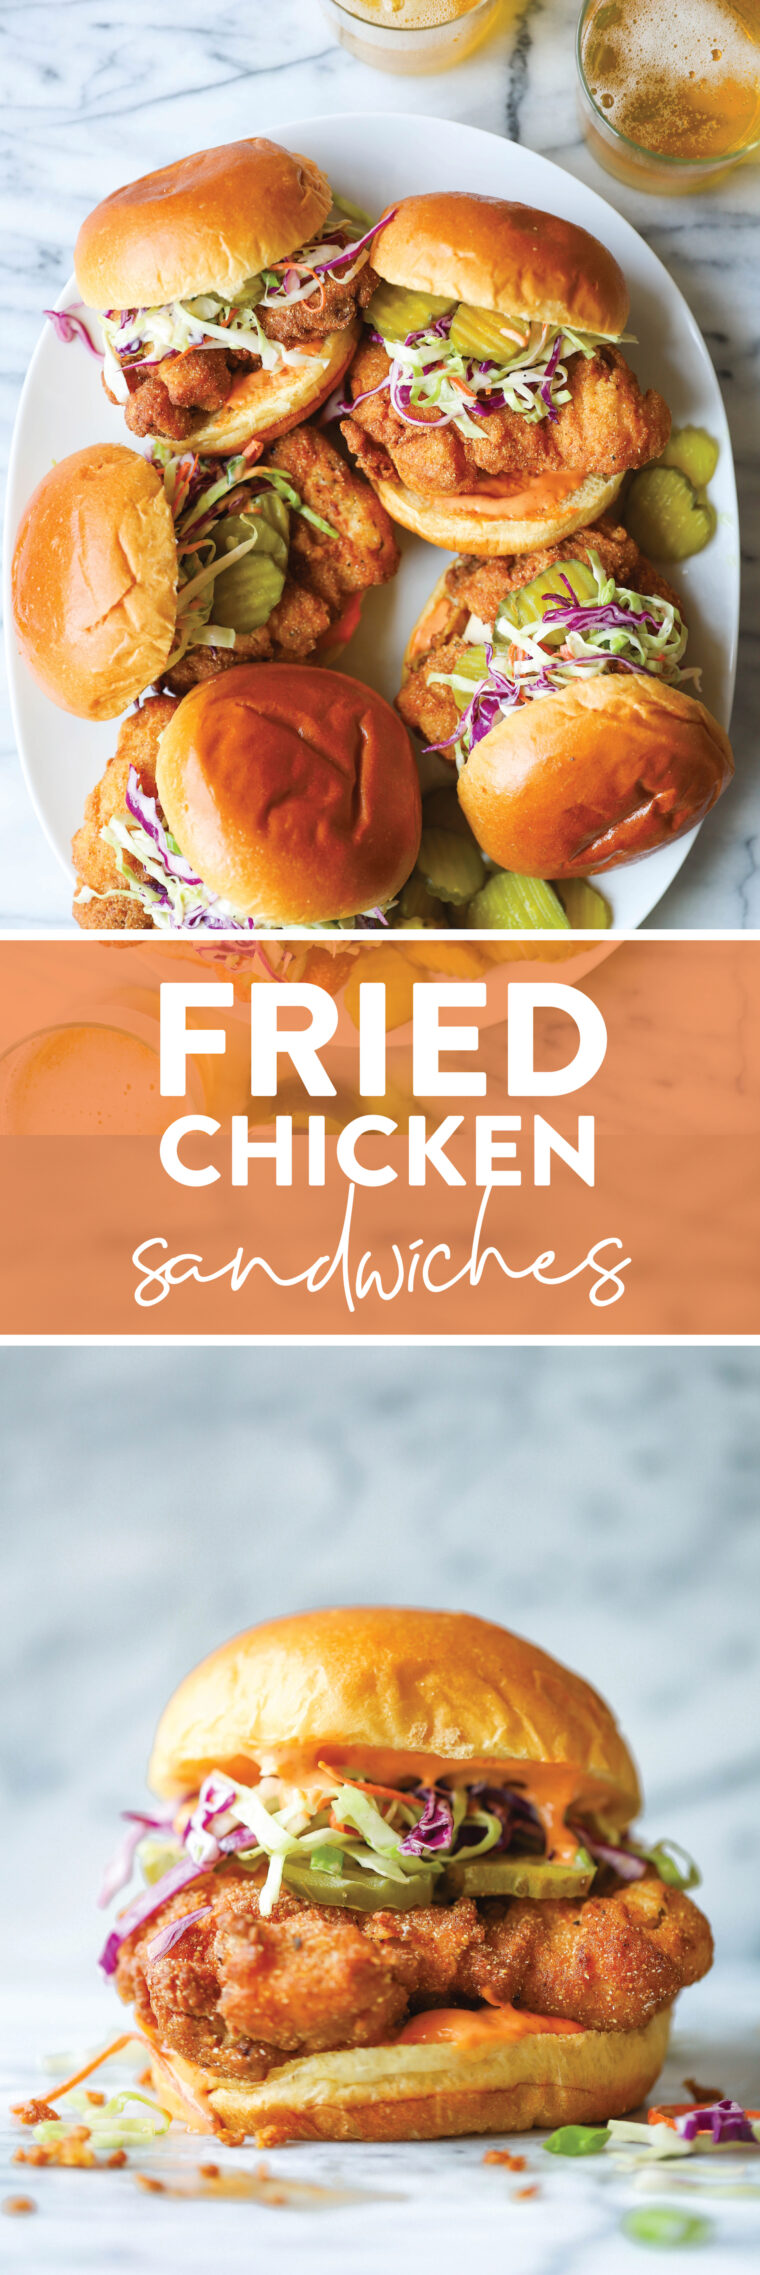 Fried Chicken Sandwiches - KILLER buttermilk fried chicken thighs! So crispy, so juicy. Served with Sriracha mayonnaise, coleslaw and pickles!